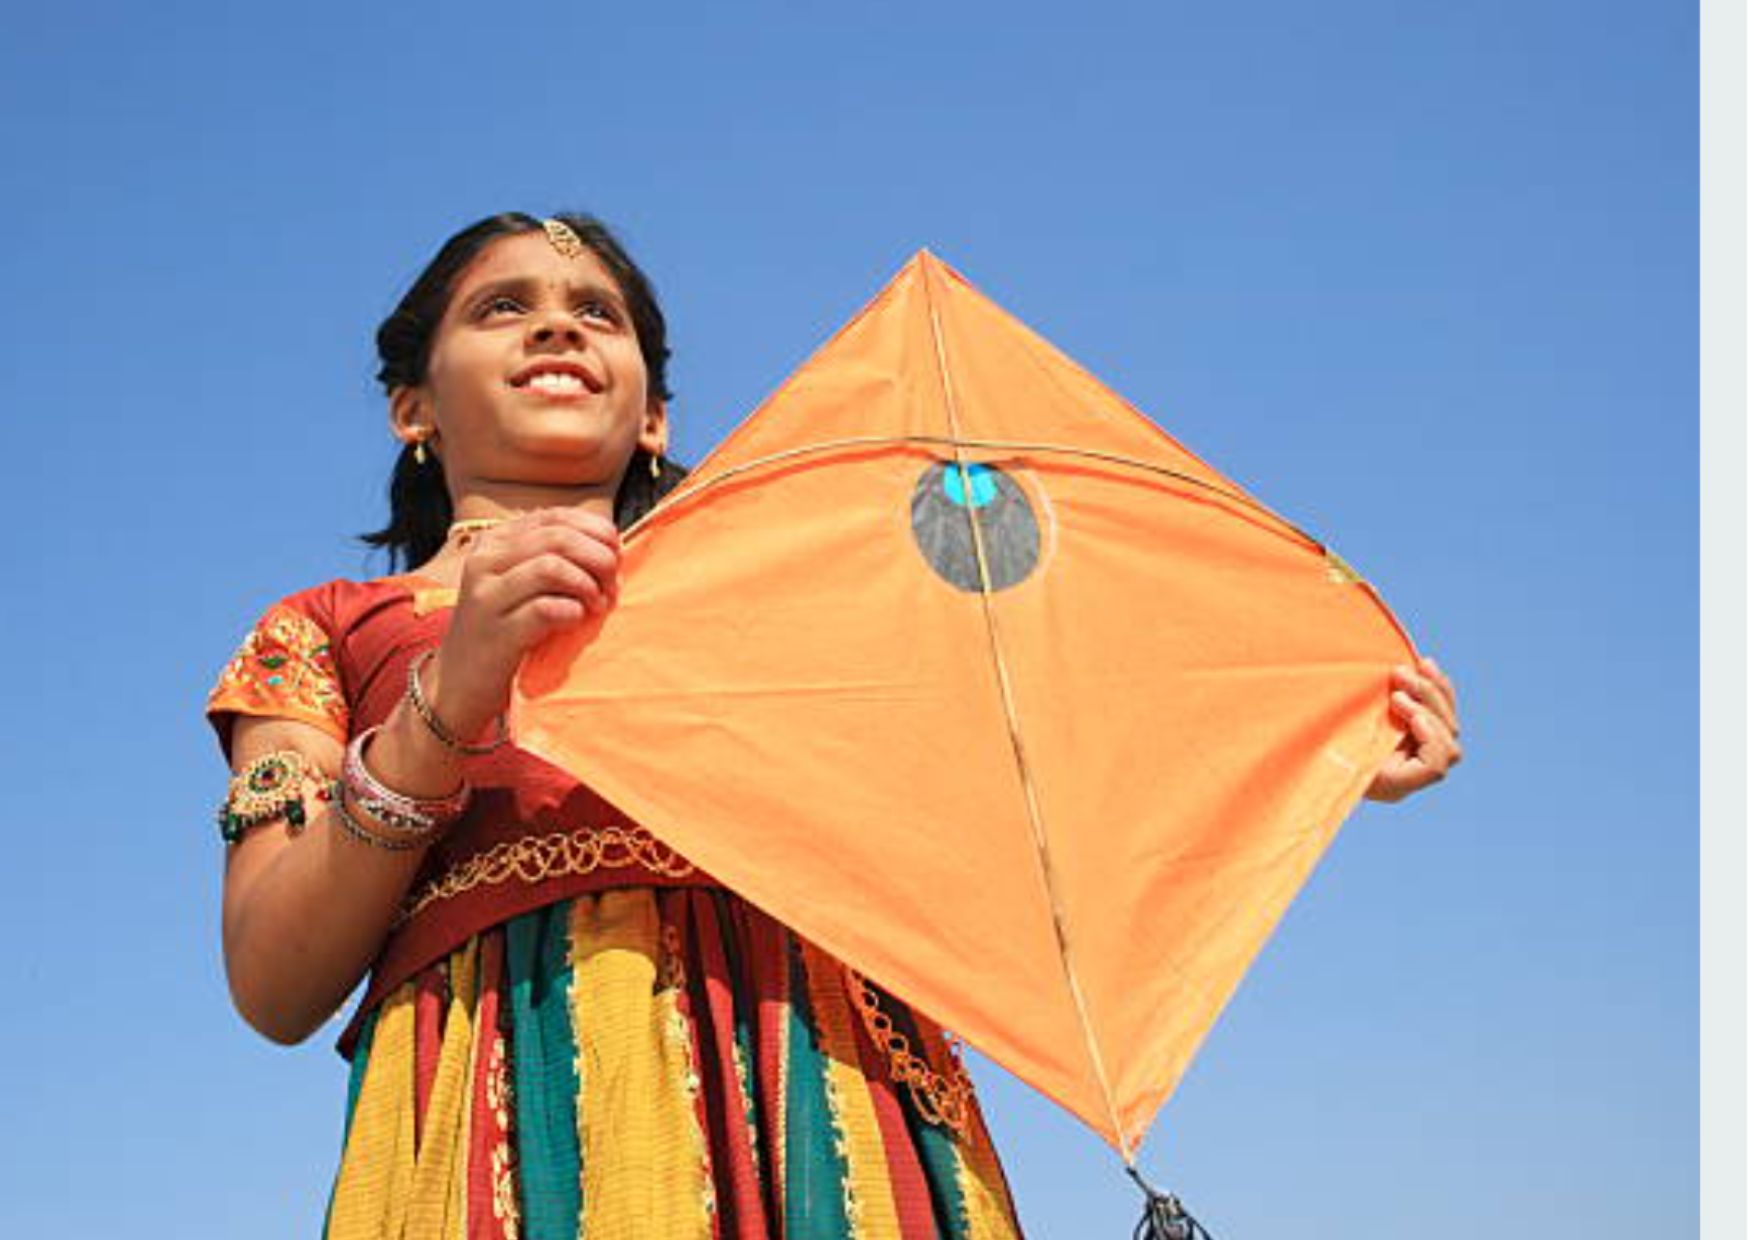 A young girl holding a kite and observing the sky for Uttrayan, the kite festival of Gujarat